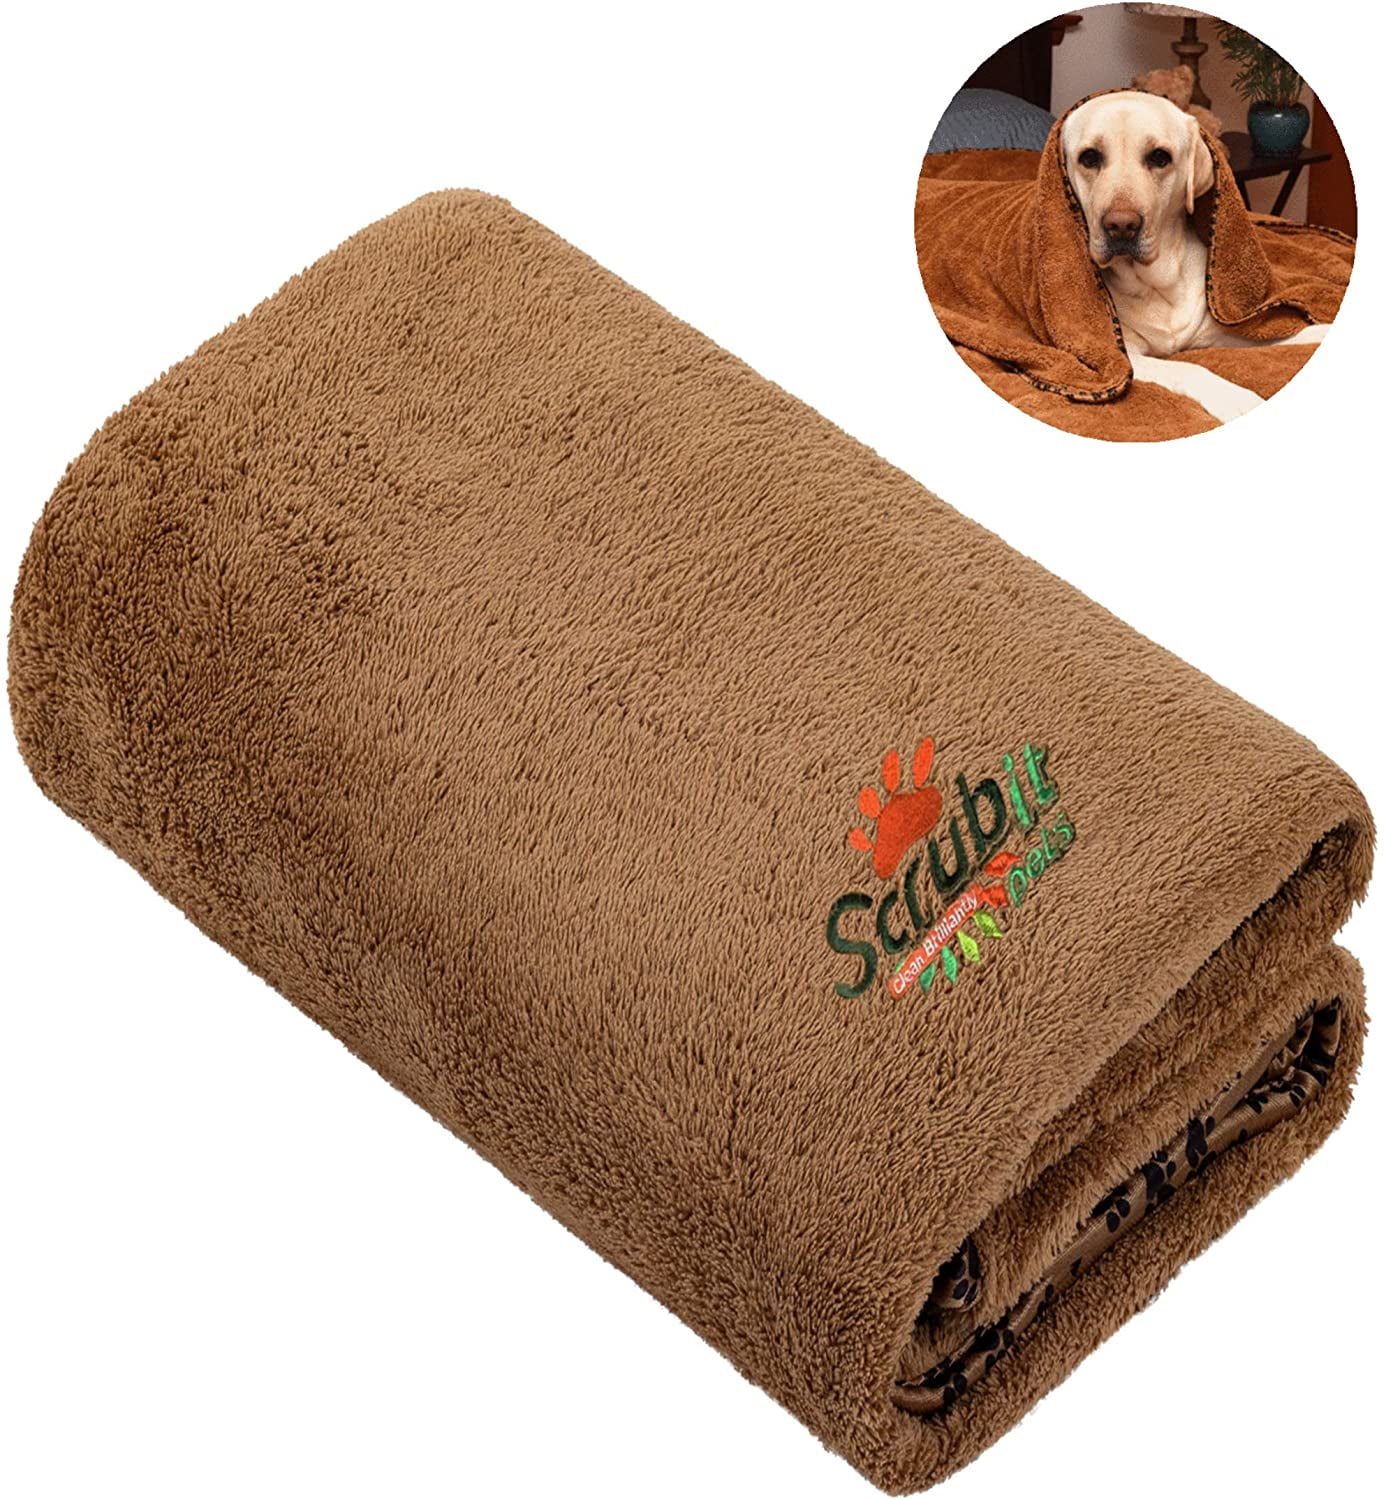 SCRUBIT Pet Blanket for Dogs and Cats, Large Fleece 53” x 31.5” to Keep